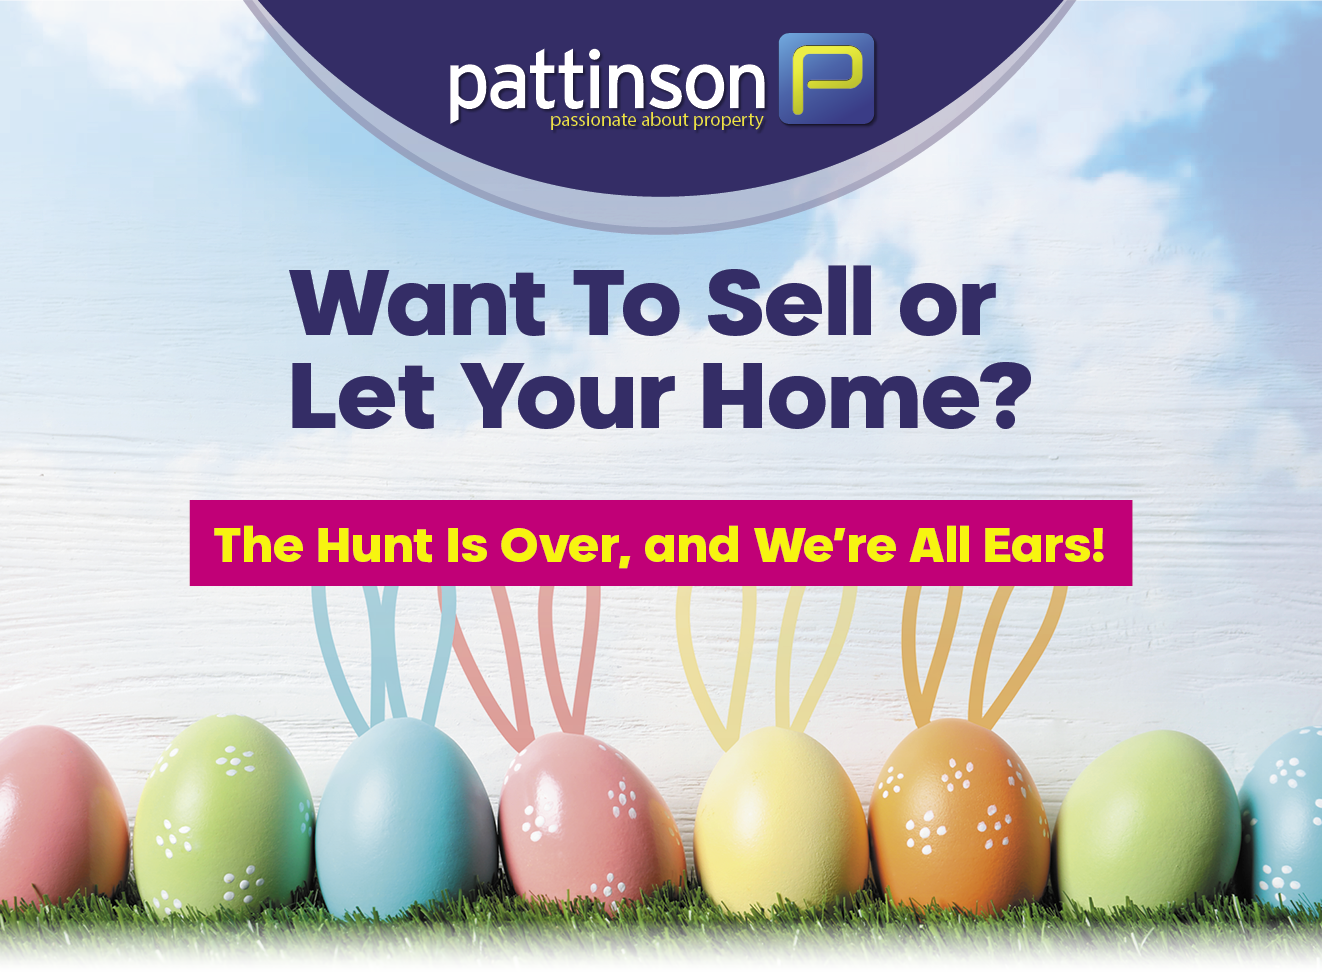 Want to sell or let your home?